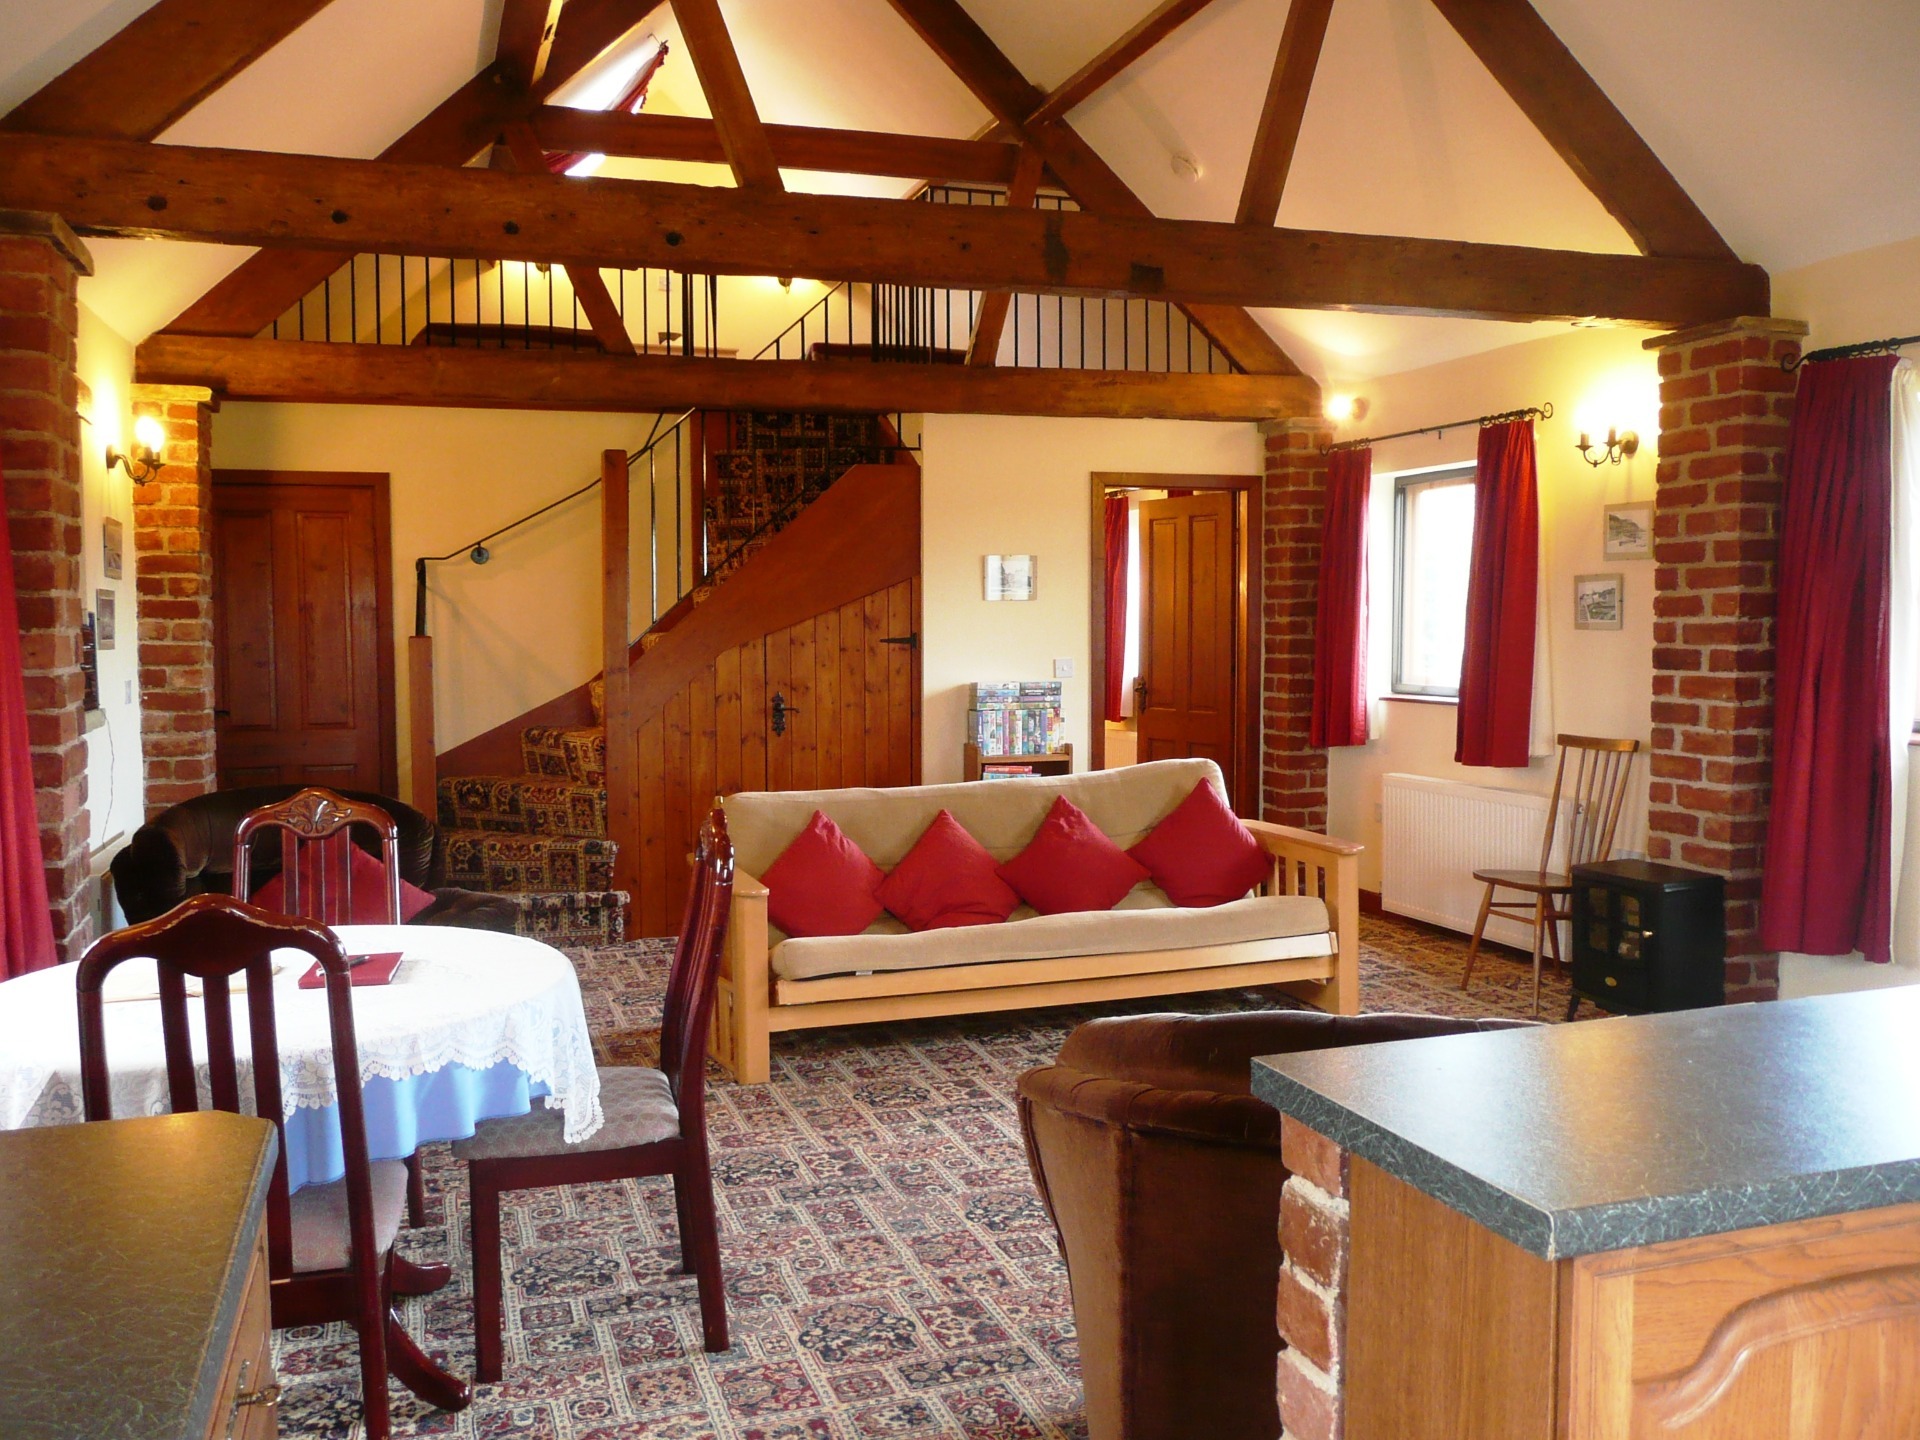 Inside Appletree Cottage at Woodhouse Farm, Westow